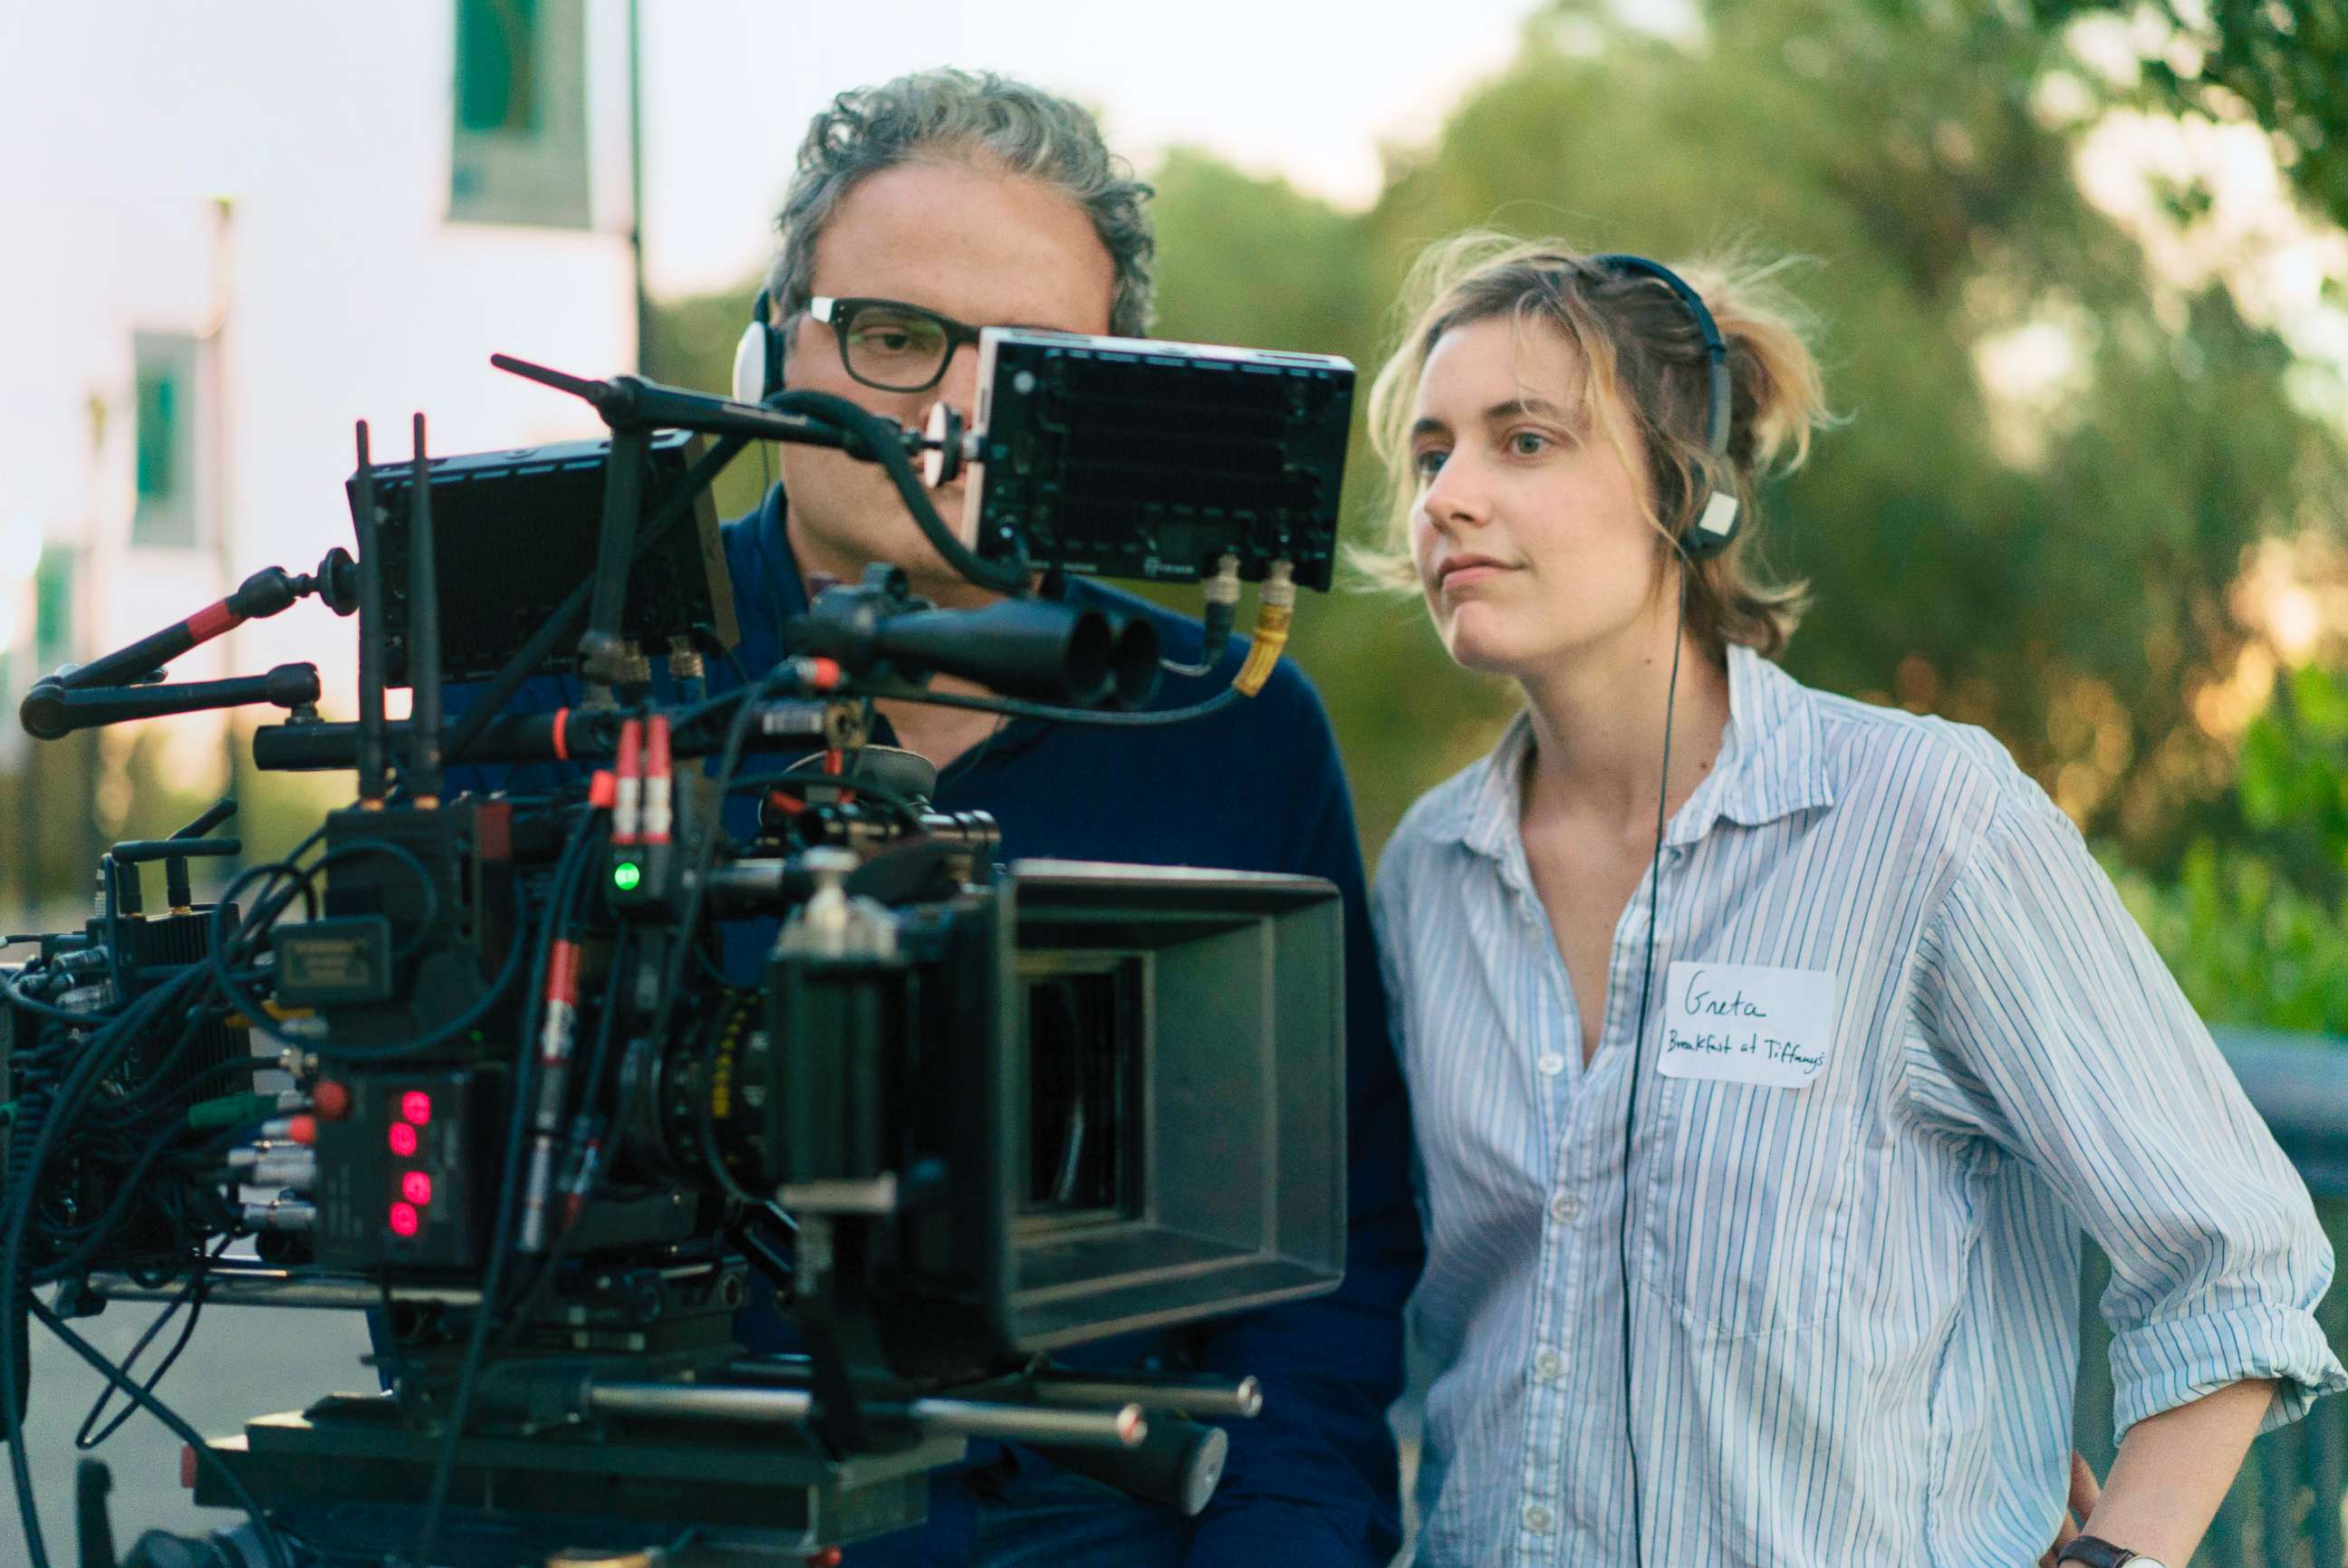 PHOTO: Sam Levy & Greta Gerwig during the filming of "Ladybird."
